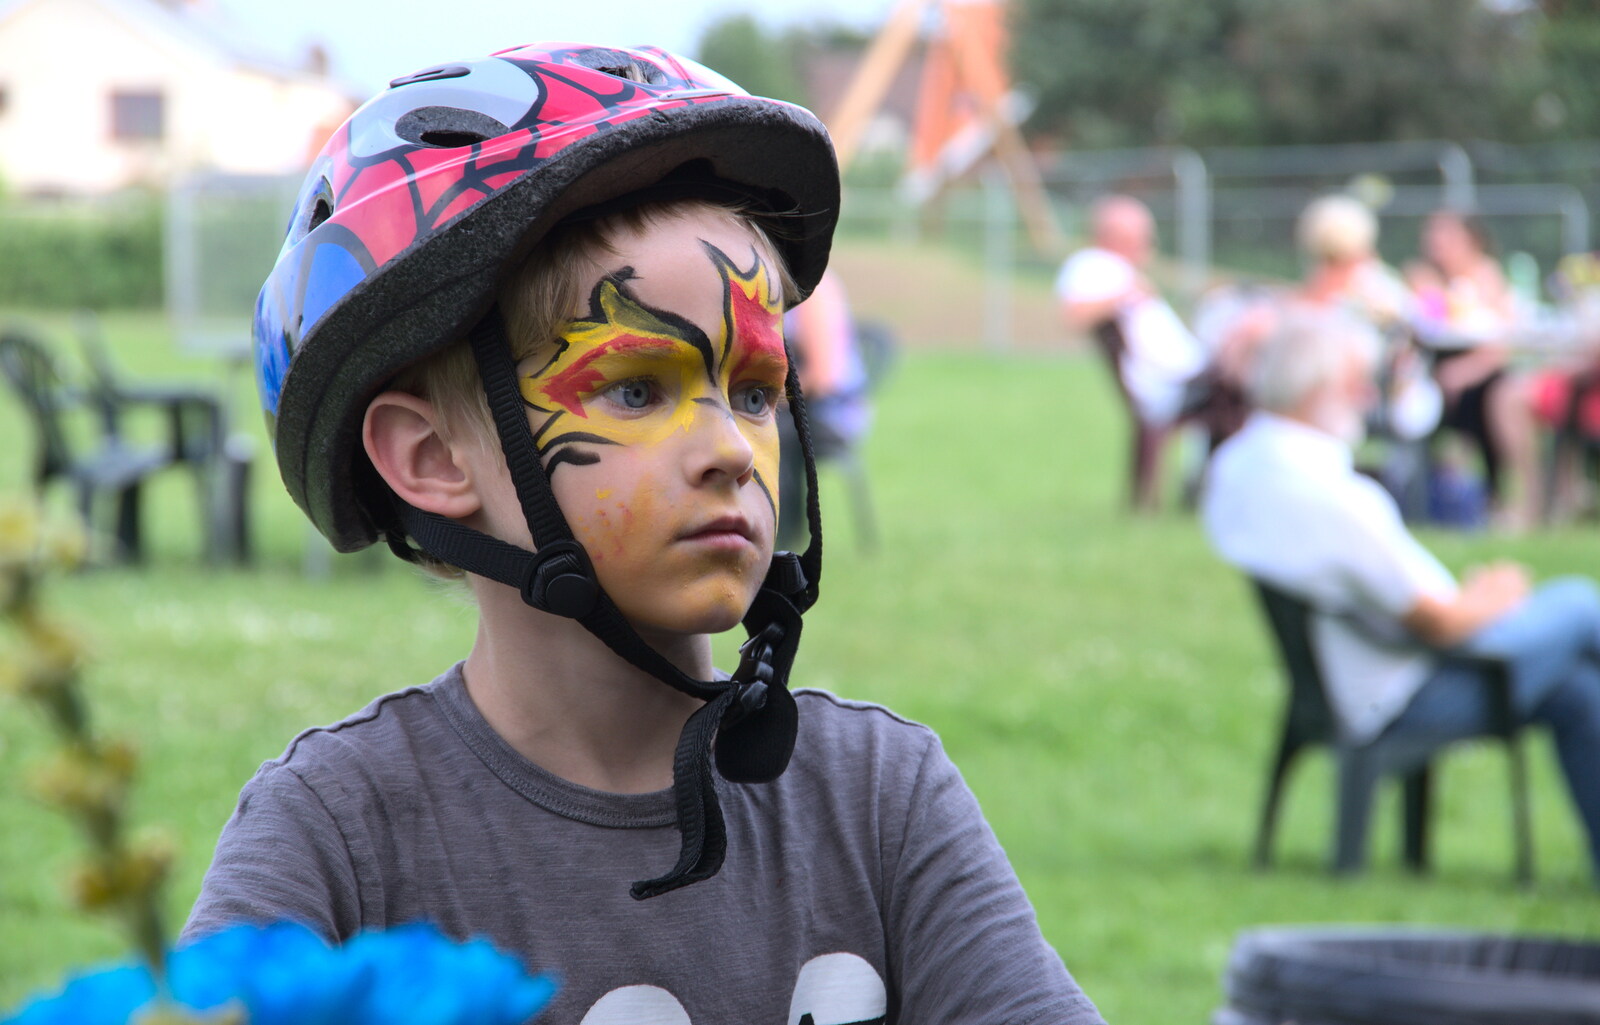 Harry in his bike helmet from The Not-Opening of the Palgrave Playground, Palgrave, Suffolk - 3rd June 2018